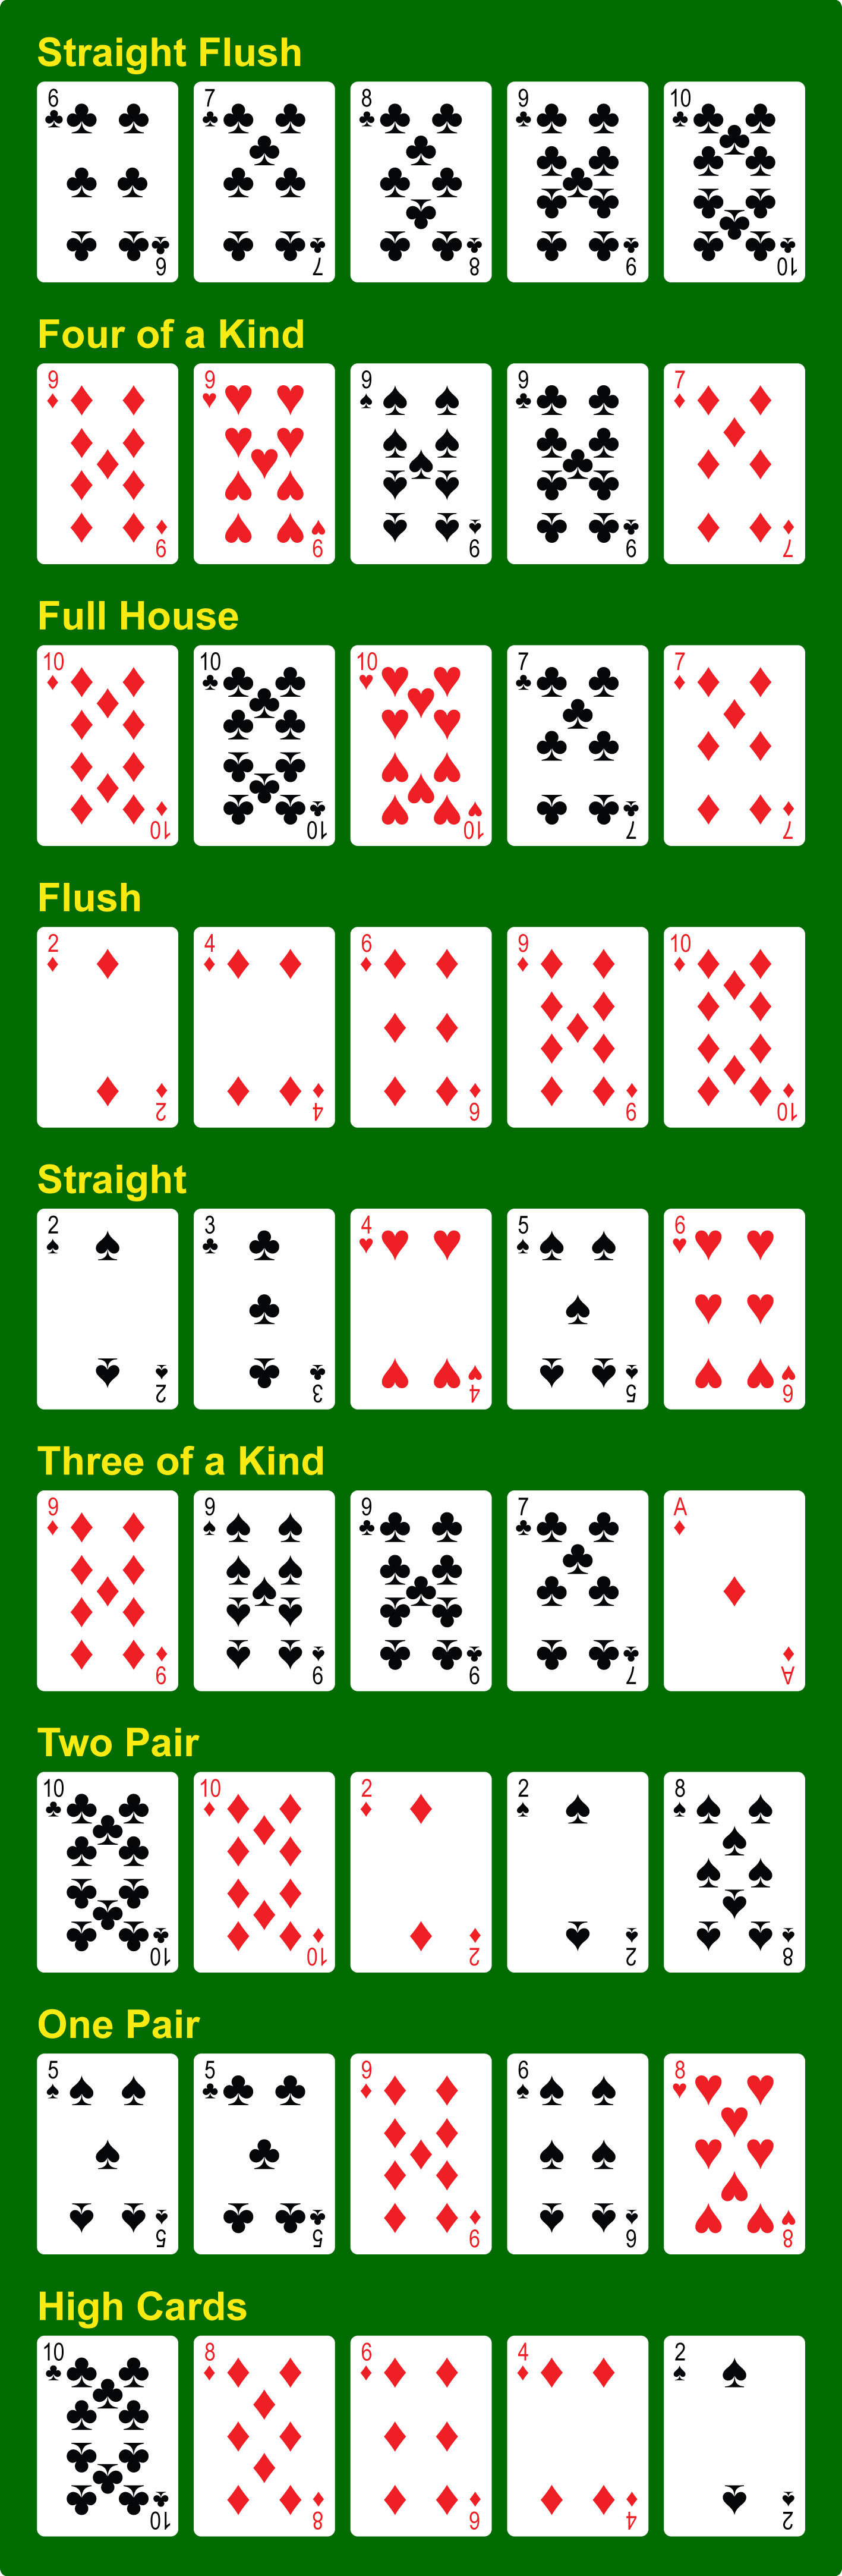 Does three of a kind beat a straight in poker?